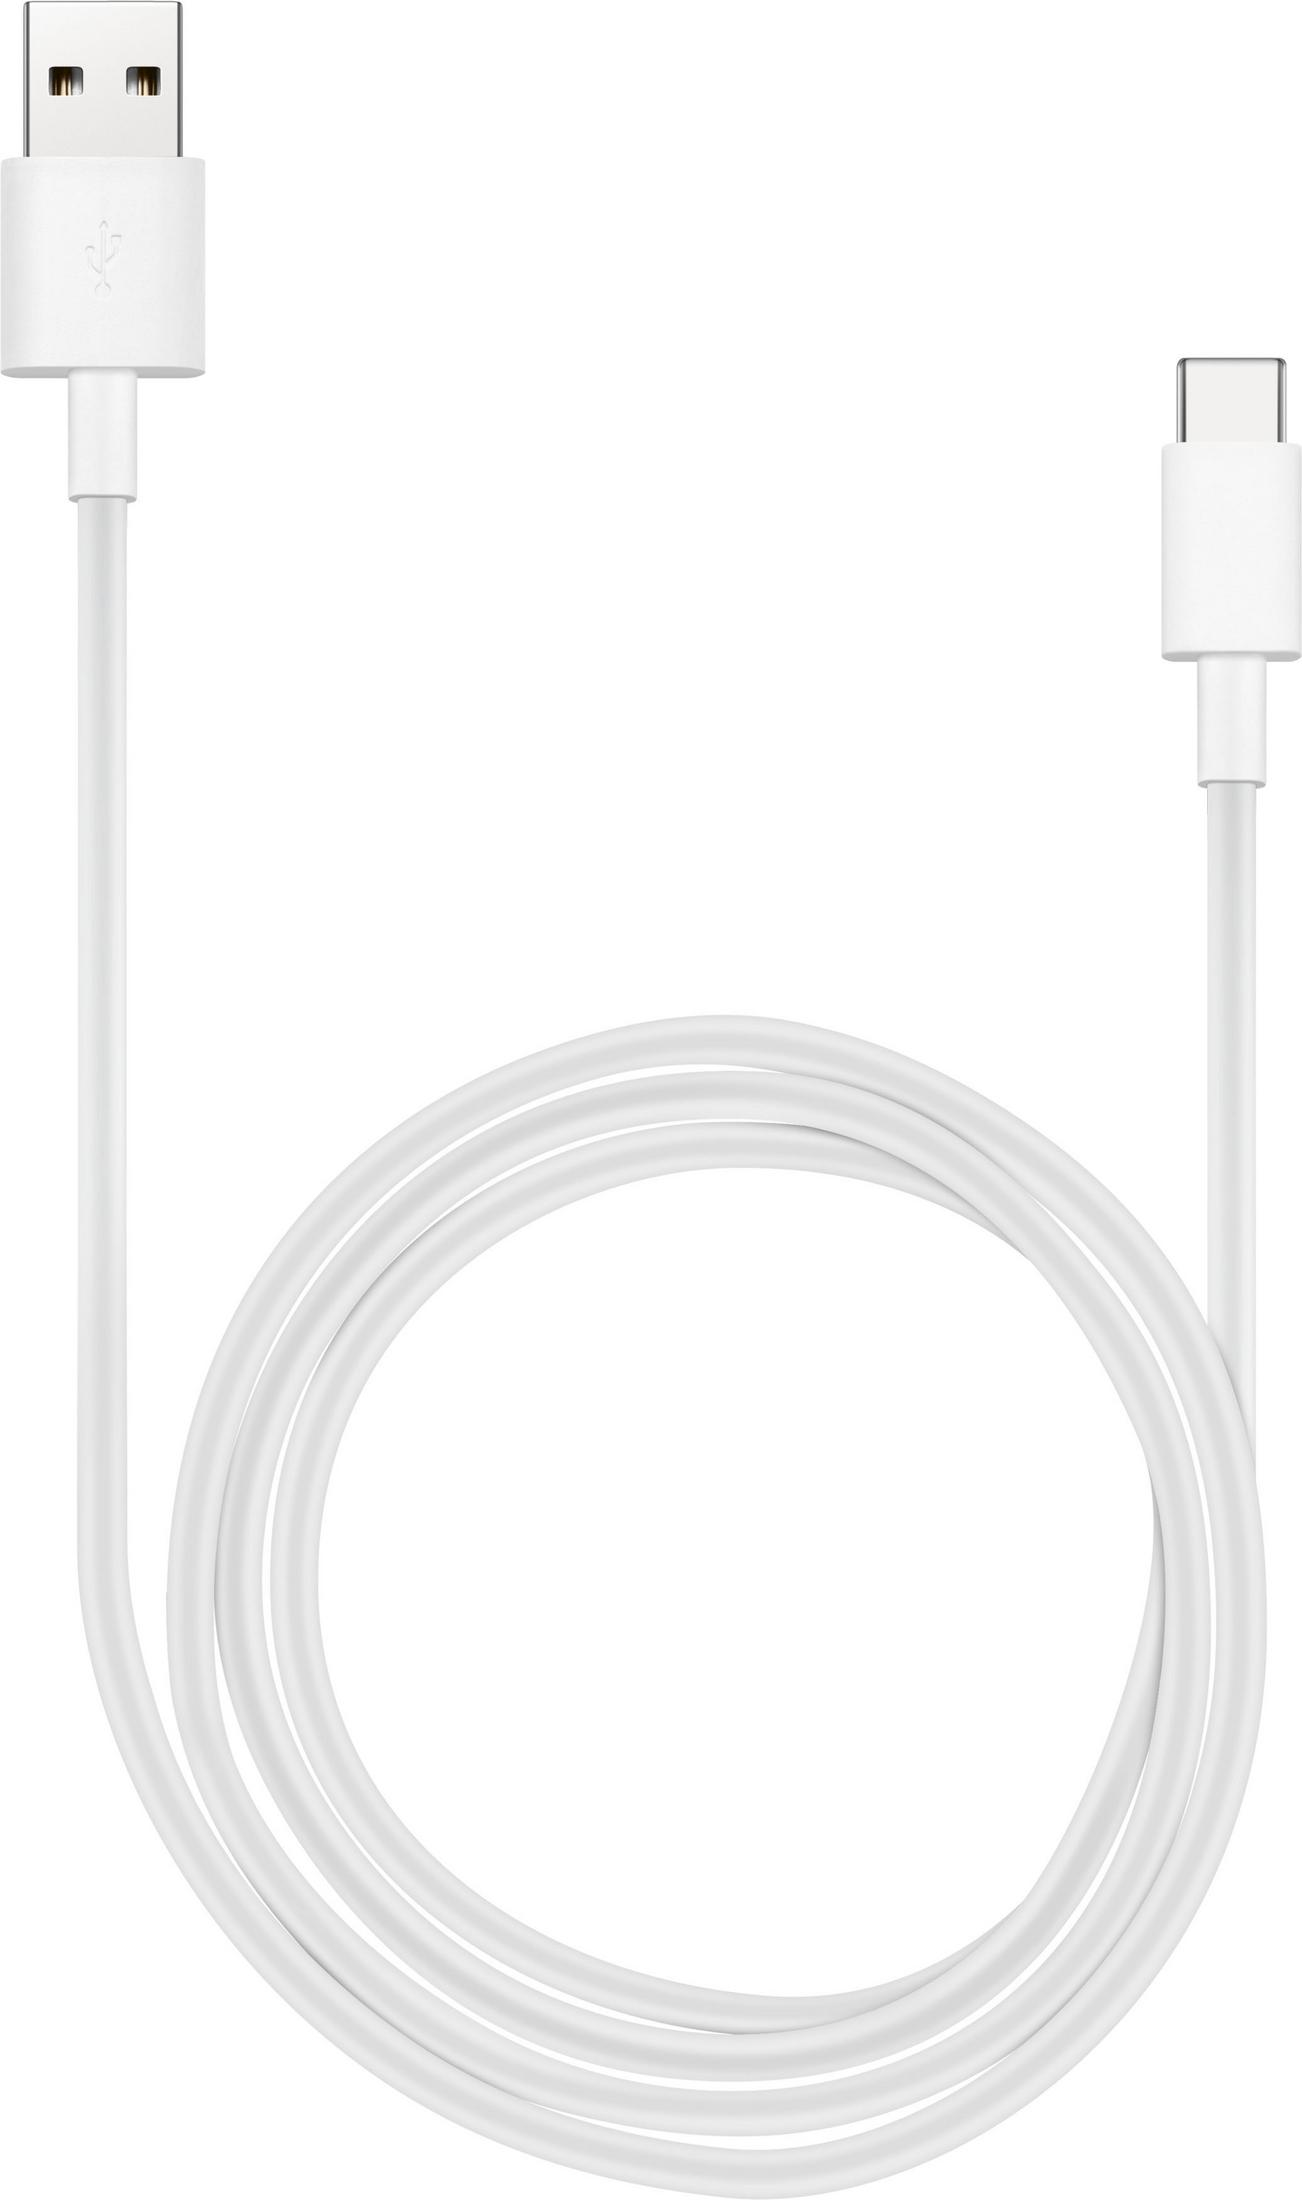 HUAWEI 190037 USB CHARGER AP32 Ladegerät 100 Volt, USB-C 240 - Weiß Universal, CABLE